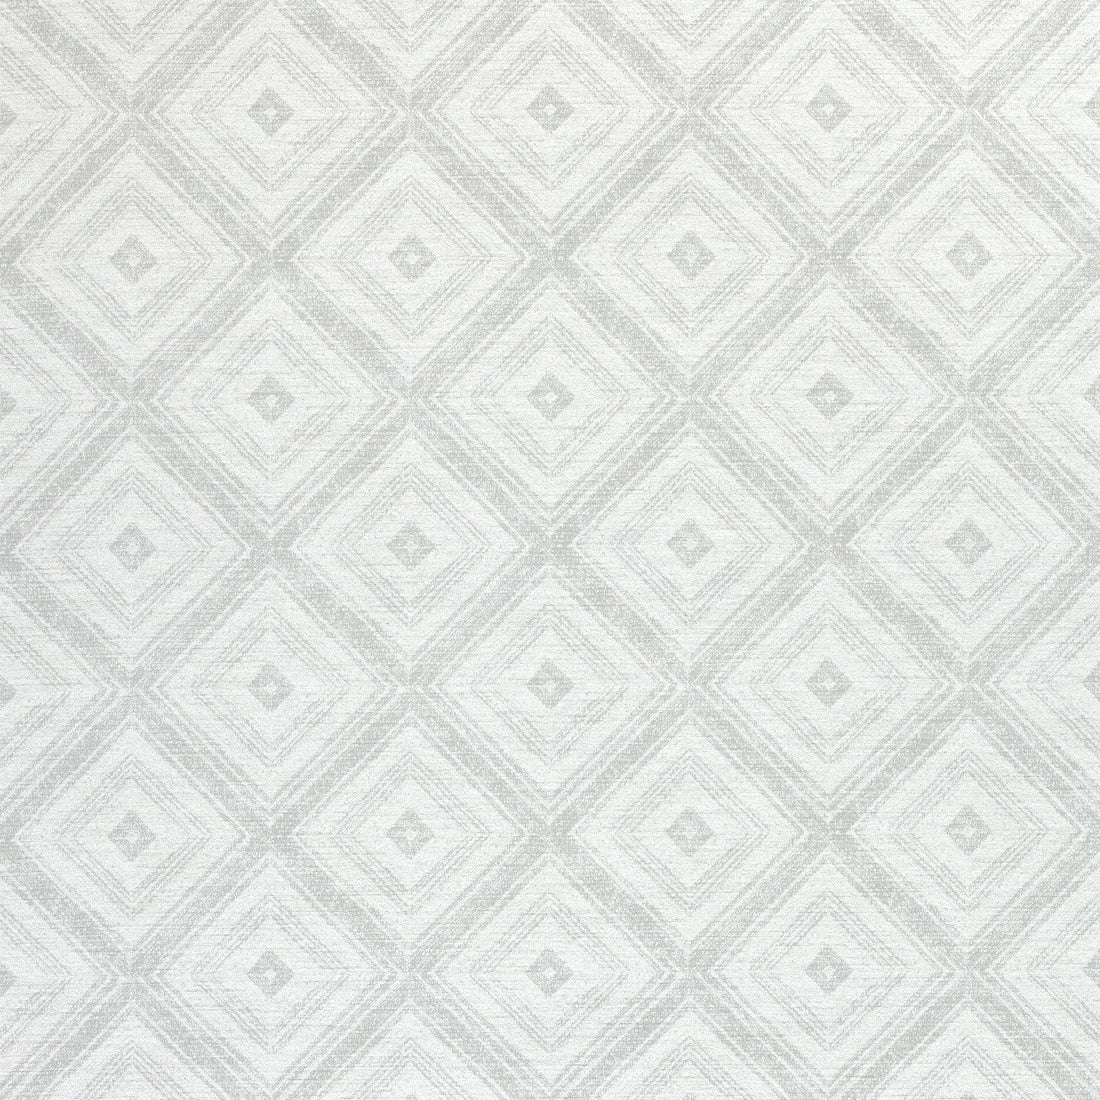 Ellison fabric in fog color - pattern number W789126 - by Thibaut in the Reverie collection